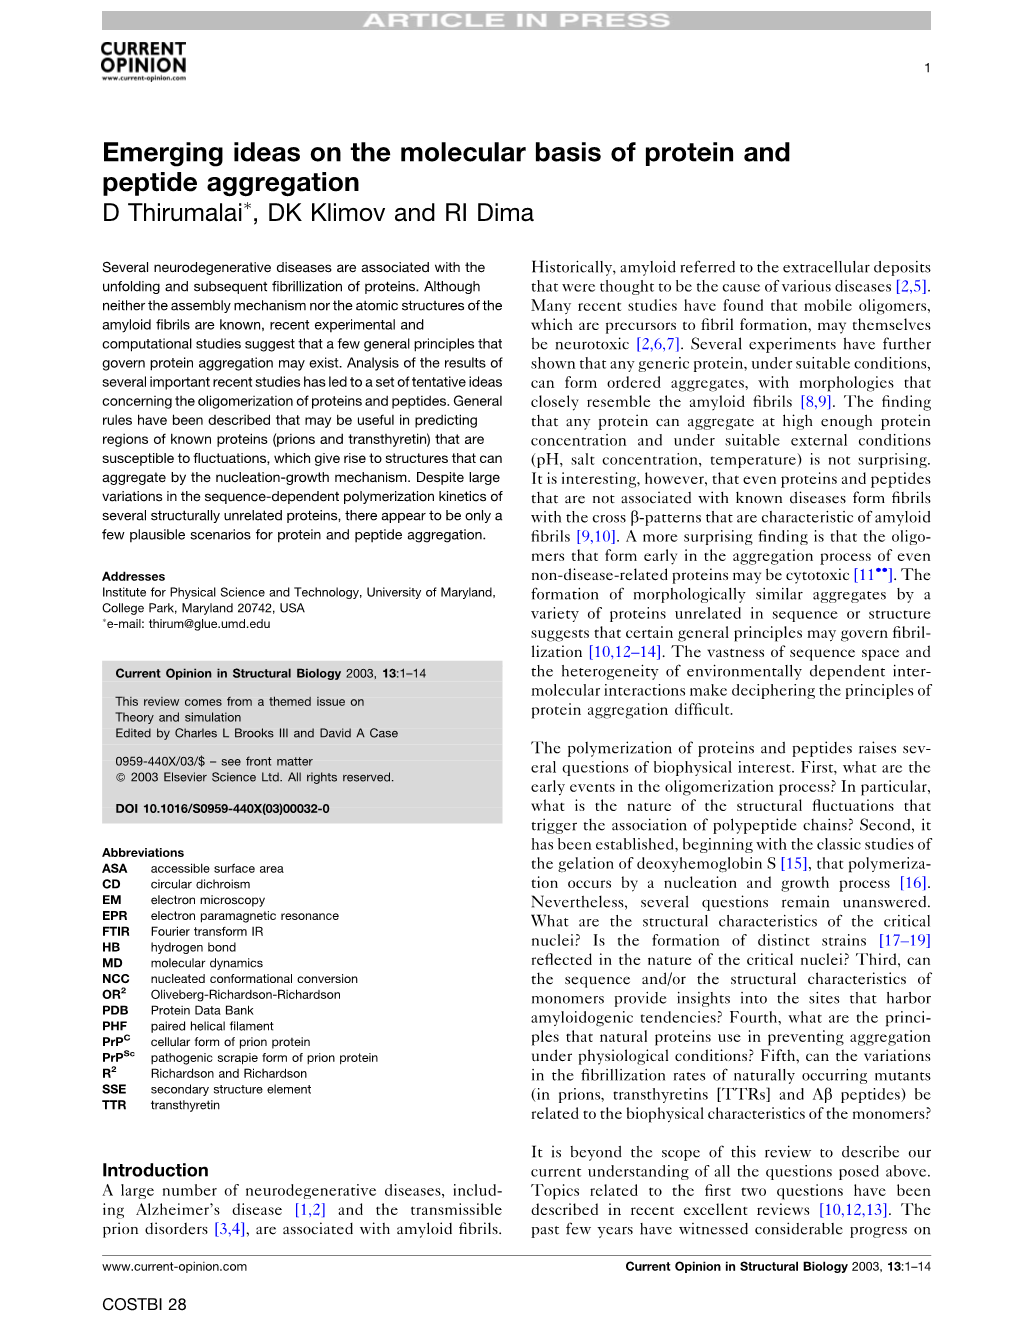 Emerging Ideas on the Molecular Basis of Protein and Peptide Aggregation D Thirumalai�, DK Klimov and RI Dima